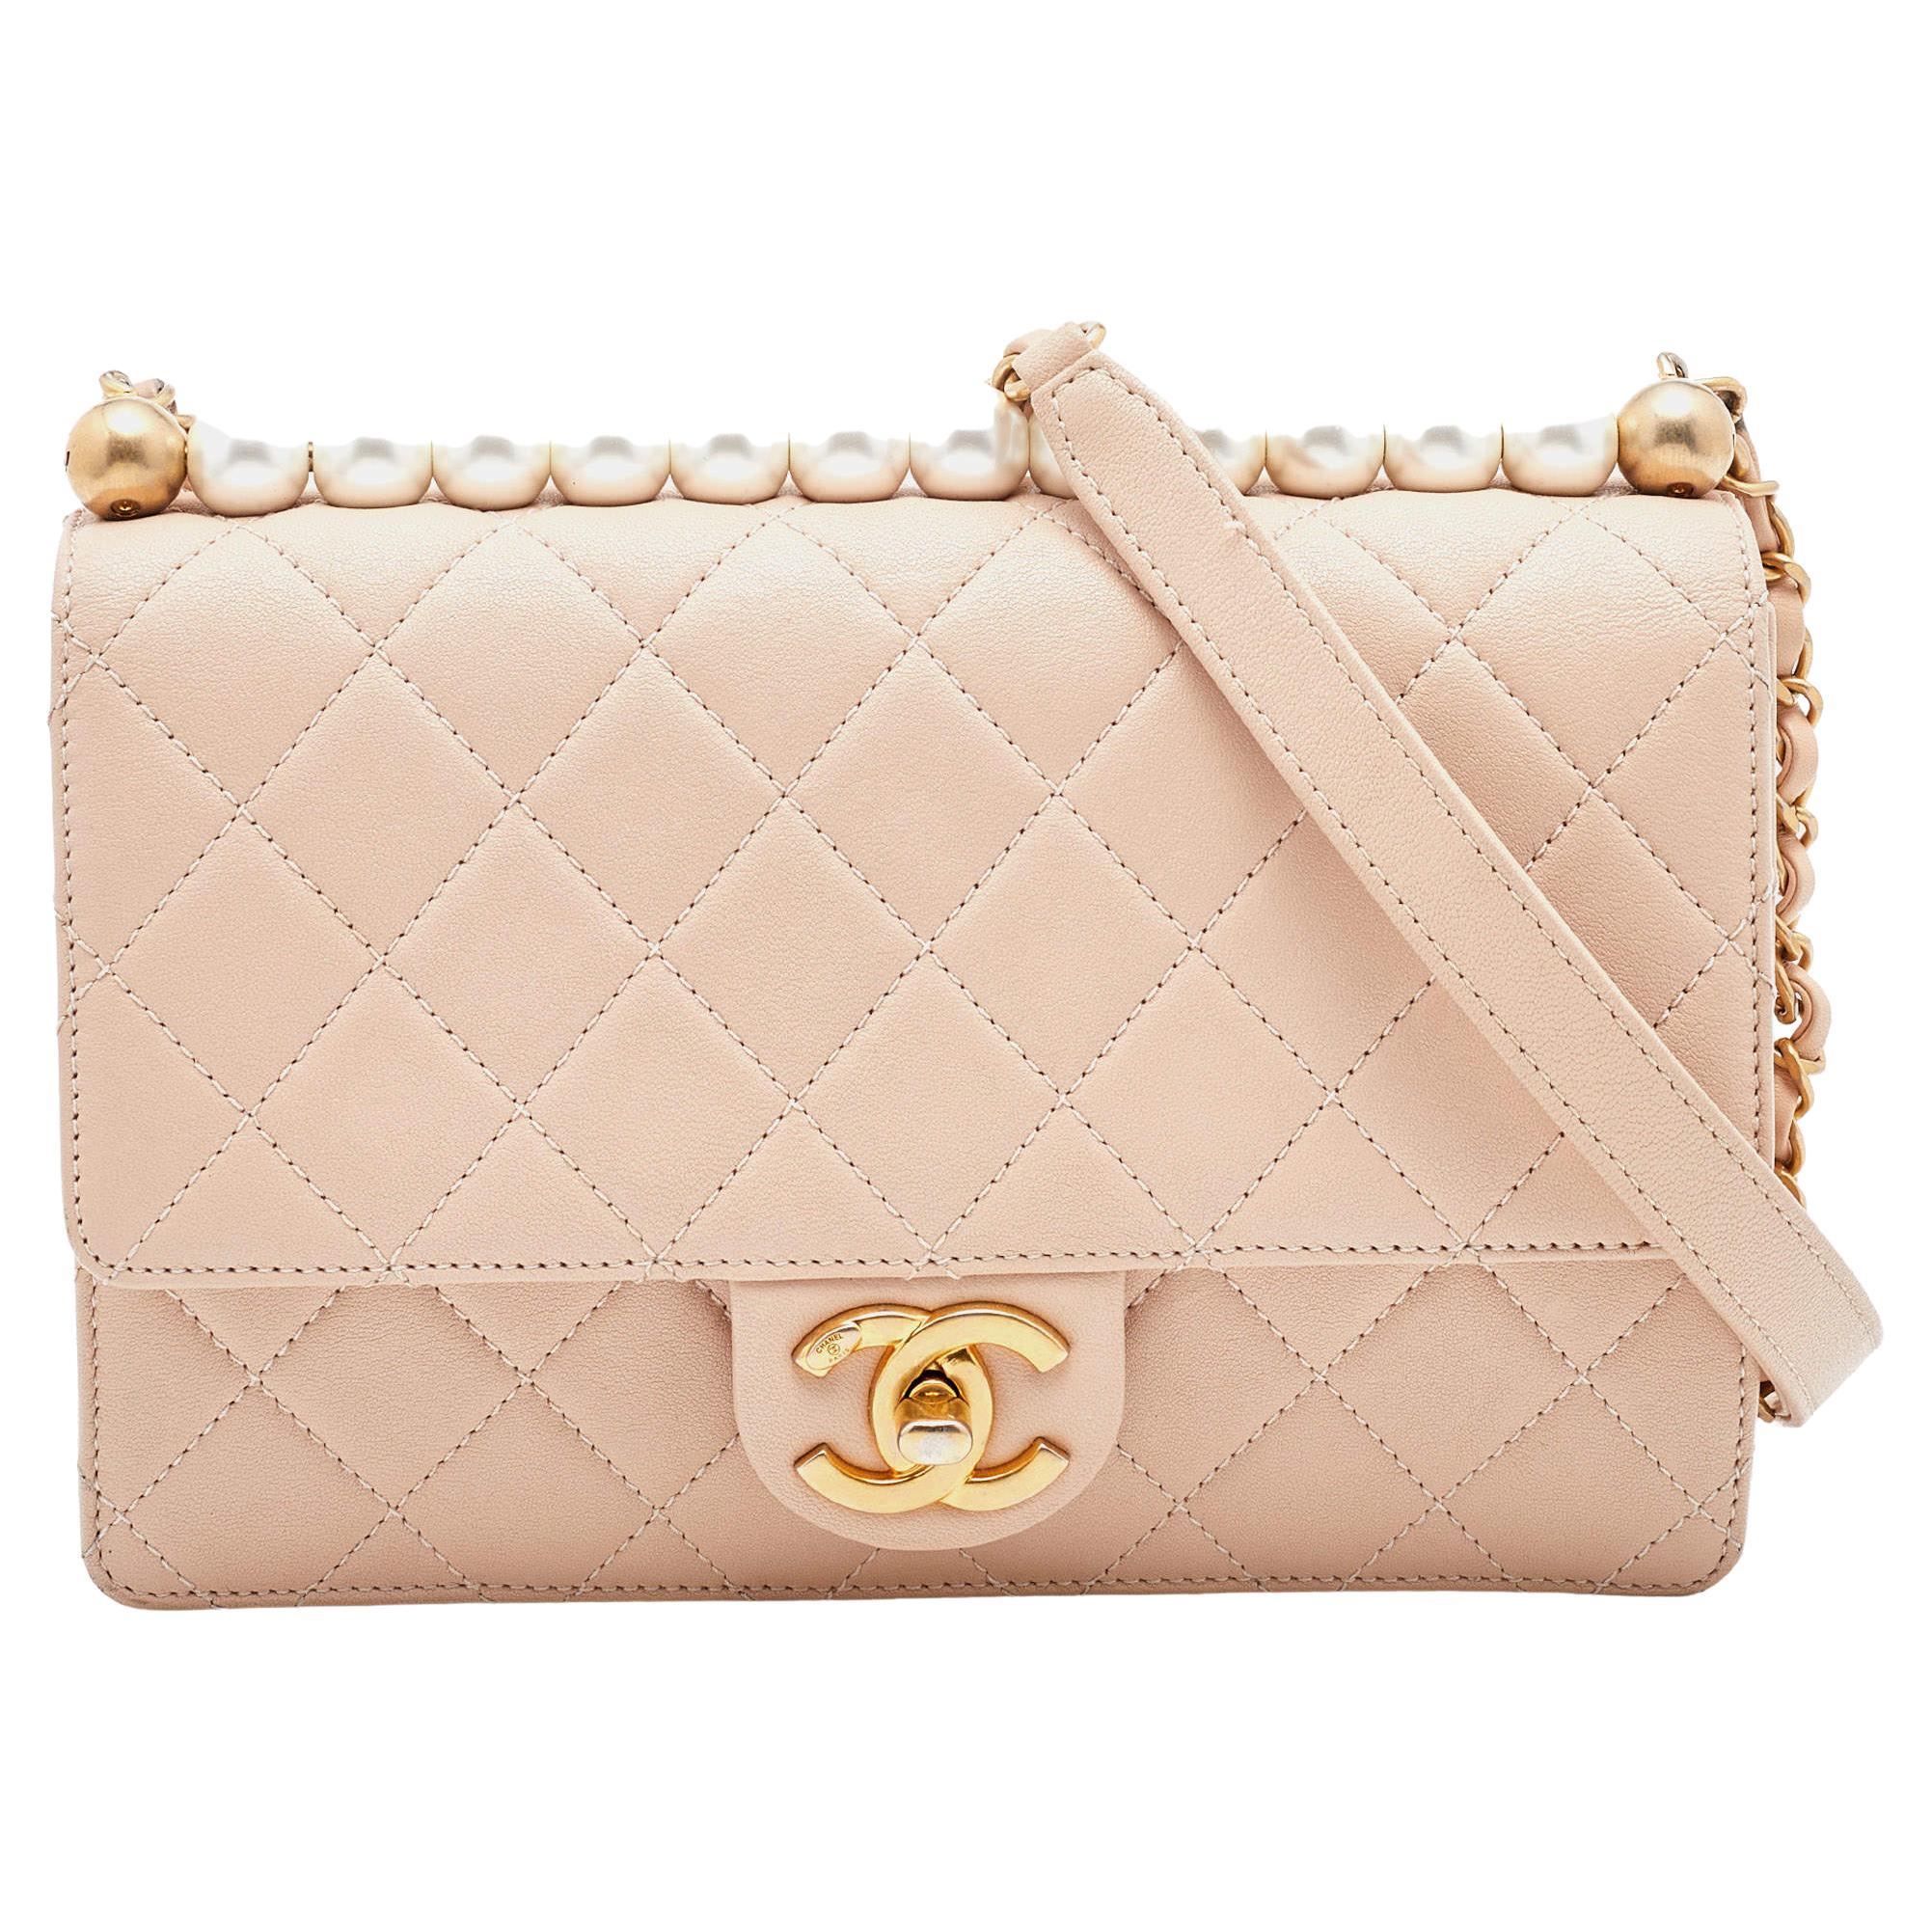 Chanel Beige Quilted Leather Medium Chic Pearls Flap Bag - 1stDibs